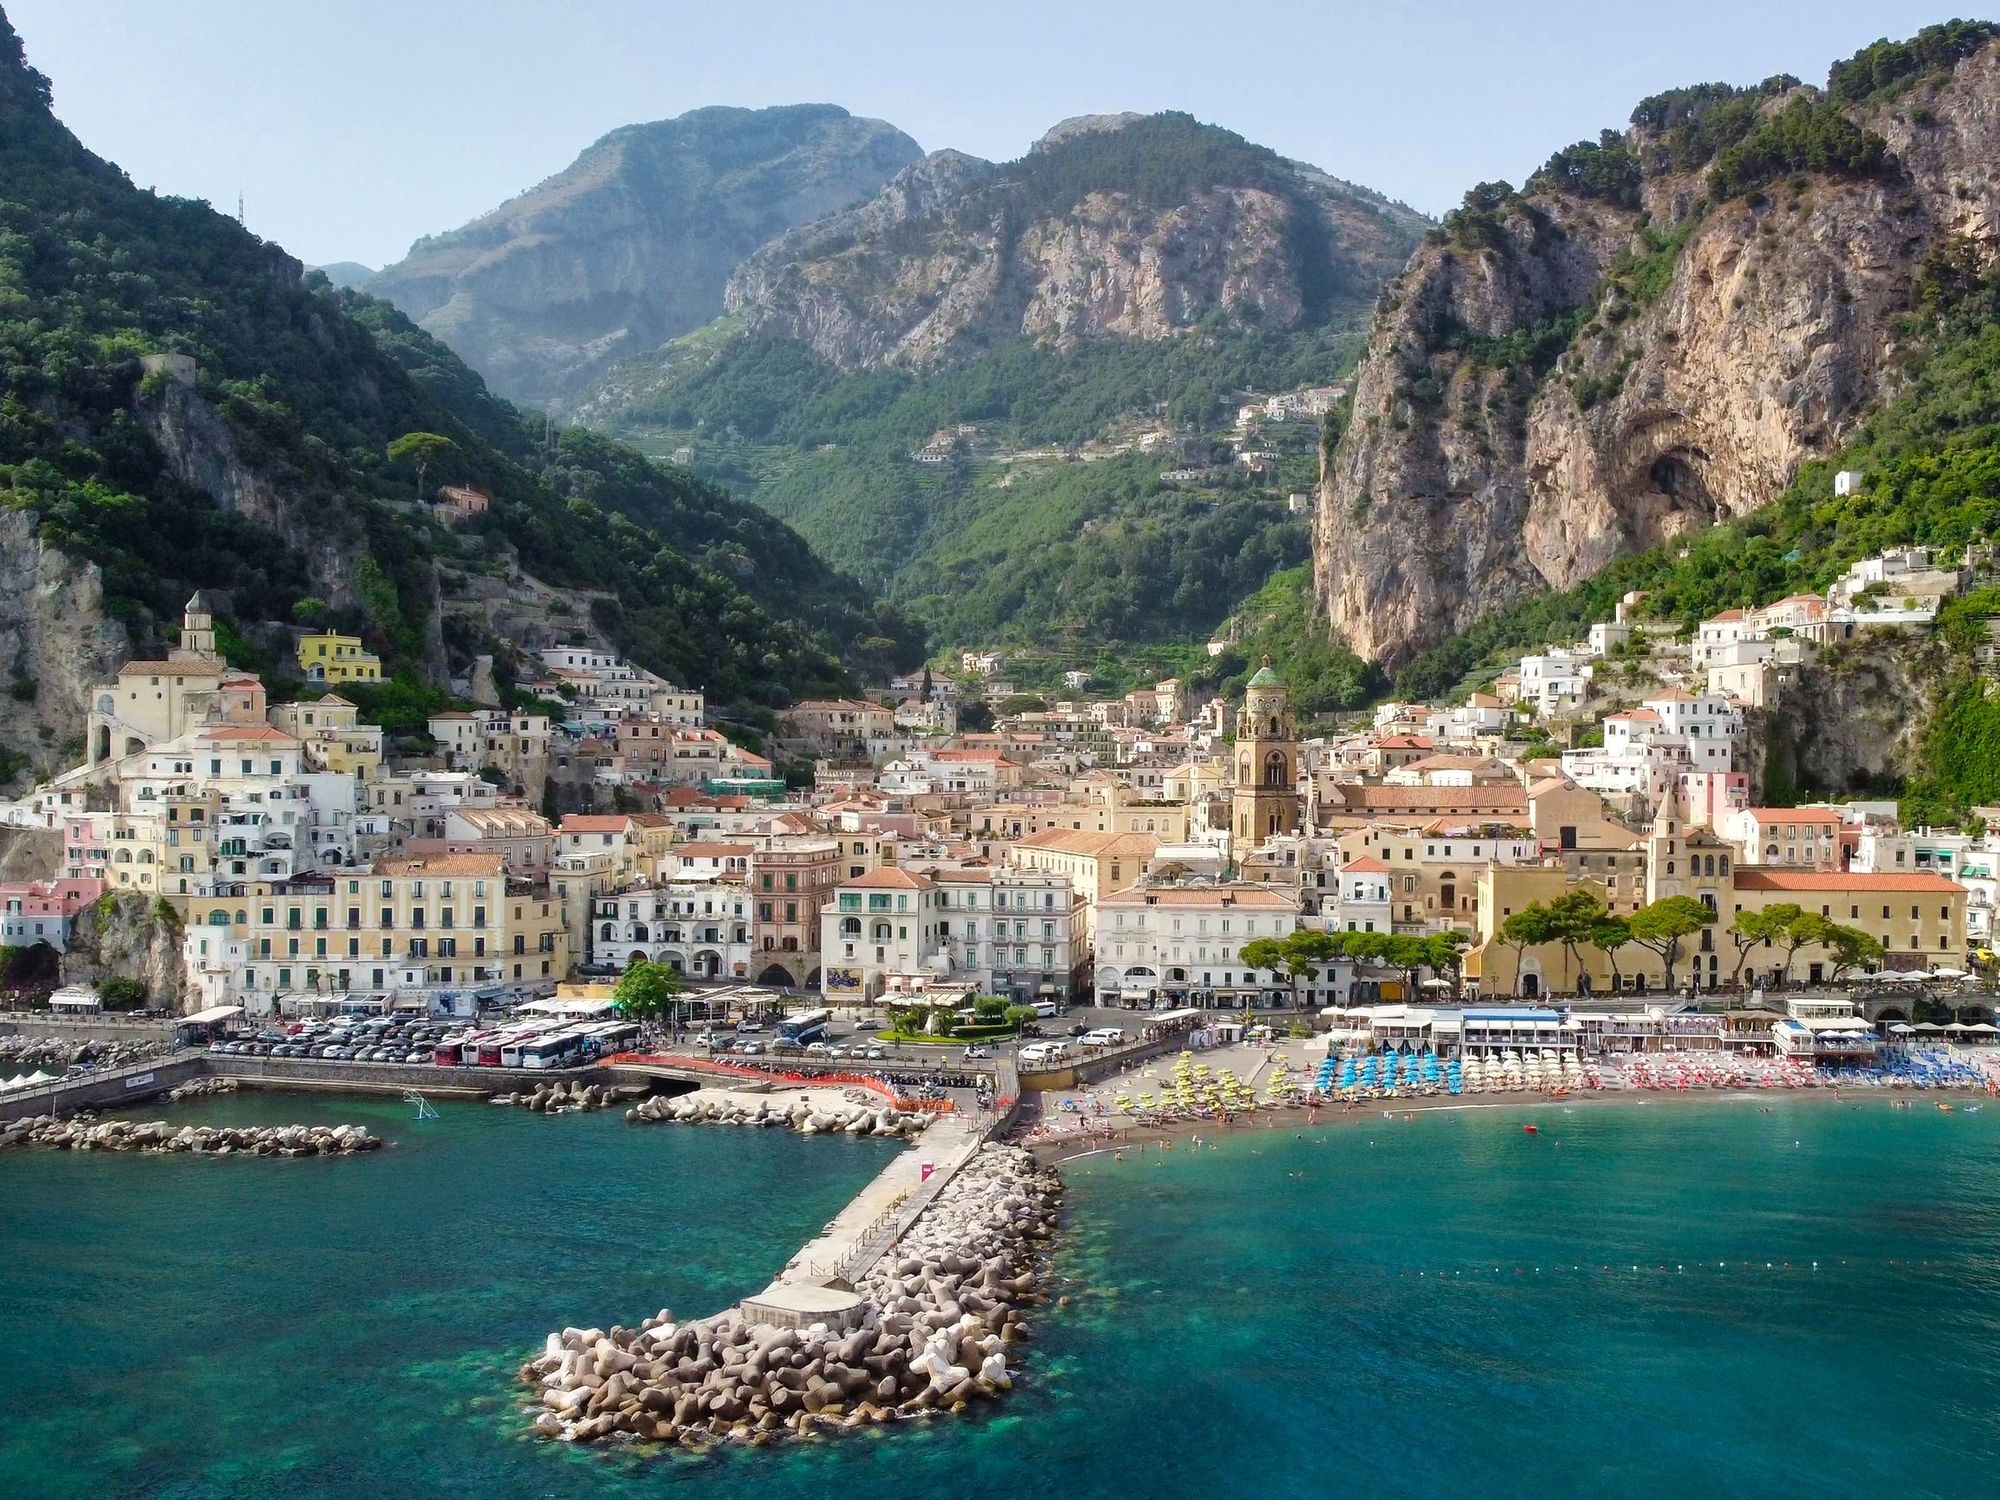 The Amalfi coastline, with beach loungers at the fore, and the colourful buildings layering into the mountains behind. Photo: Getty